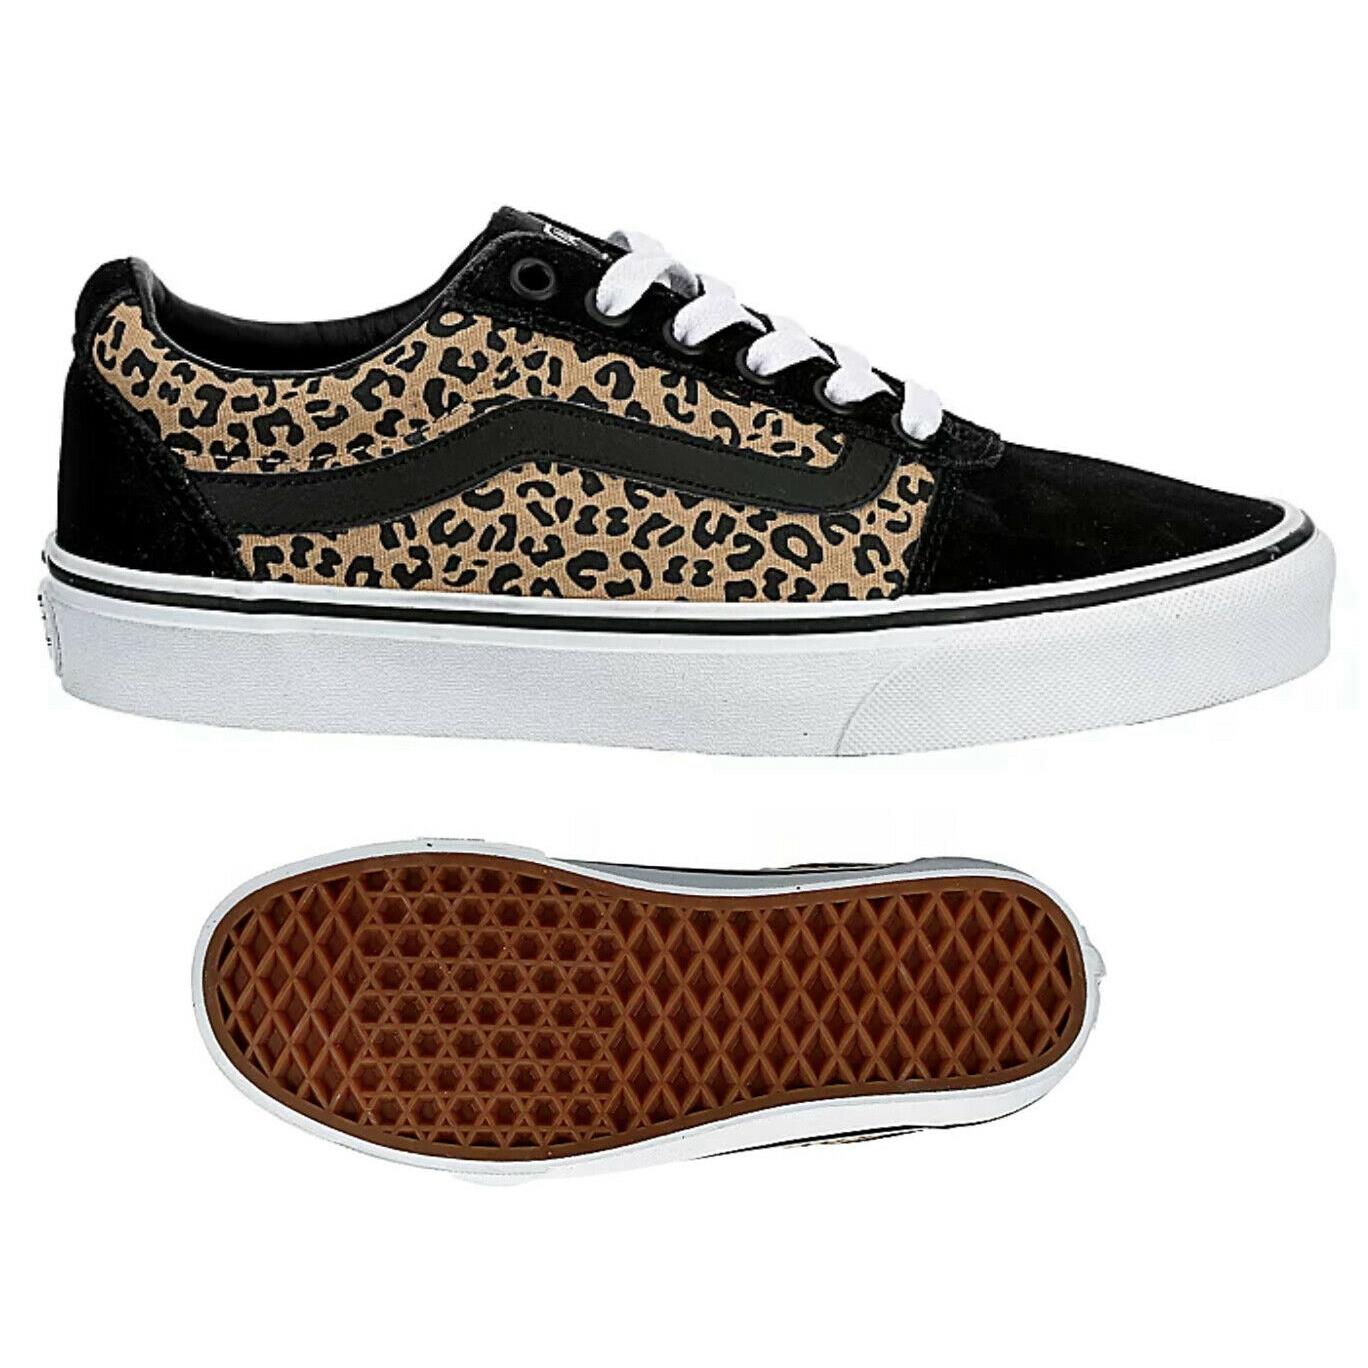 Vans Leopard Ward Casual Womens Sneakers Shoes Black Brown All Sizes